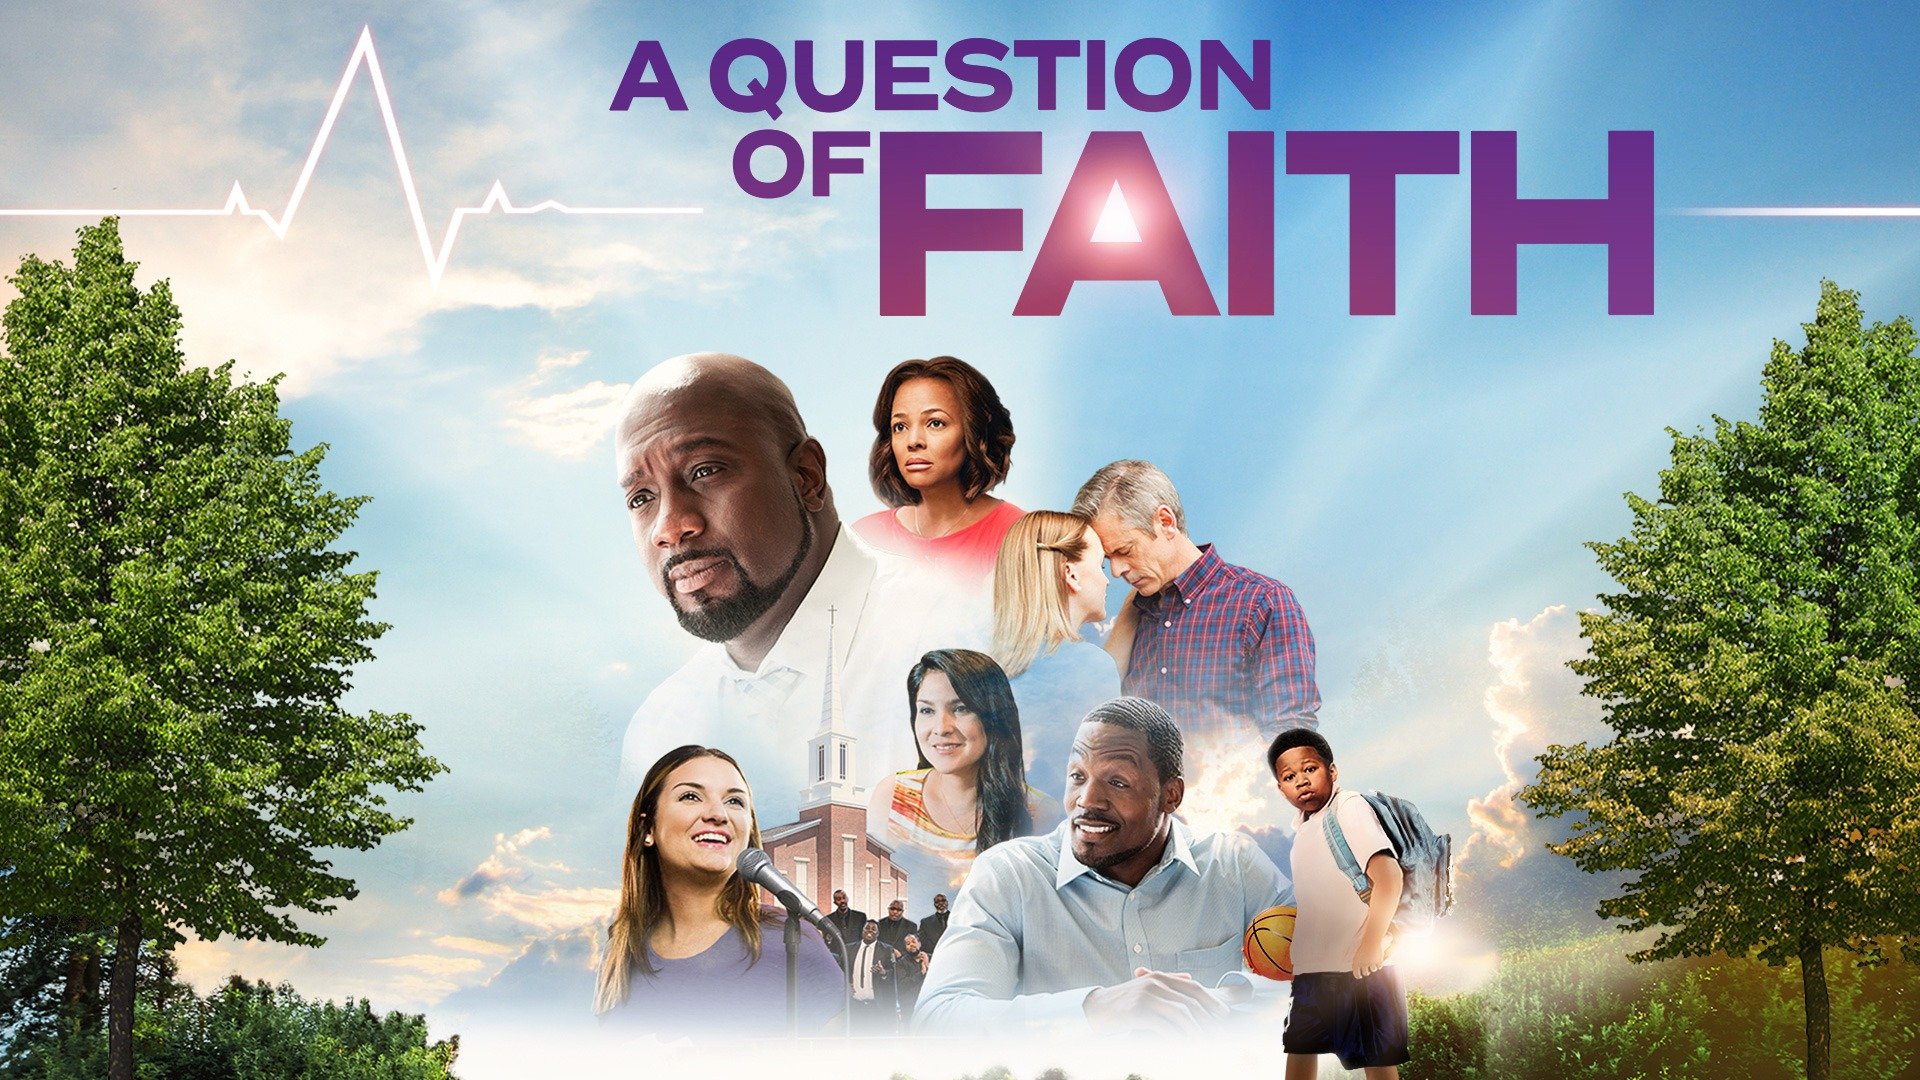 A Question of Faith: Trailer 1 - Trailers & Videos - Rotten Tomatoes